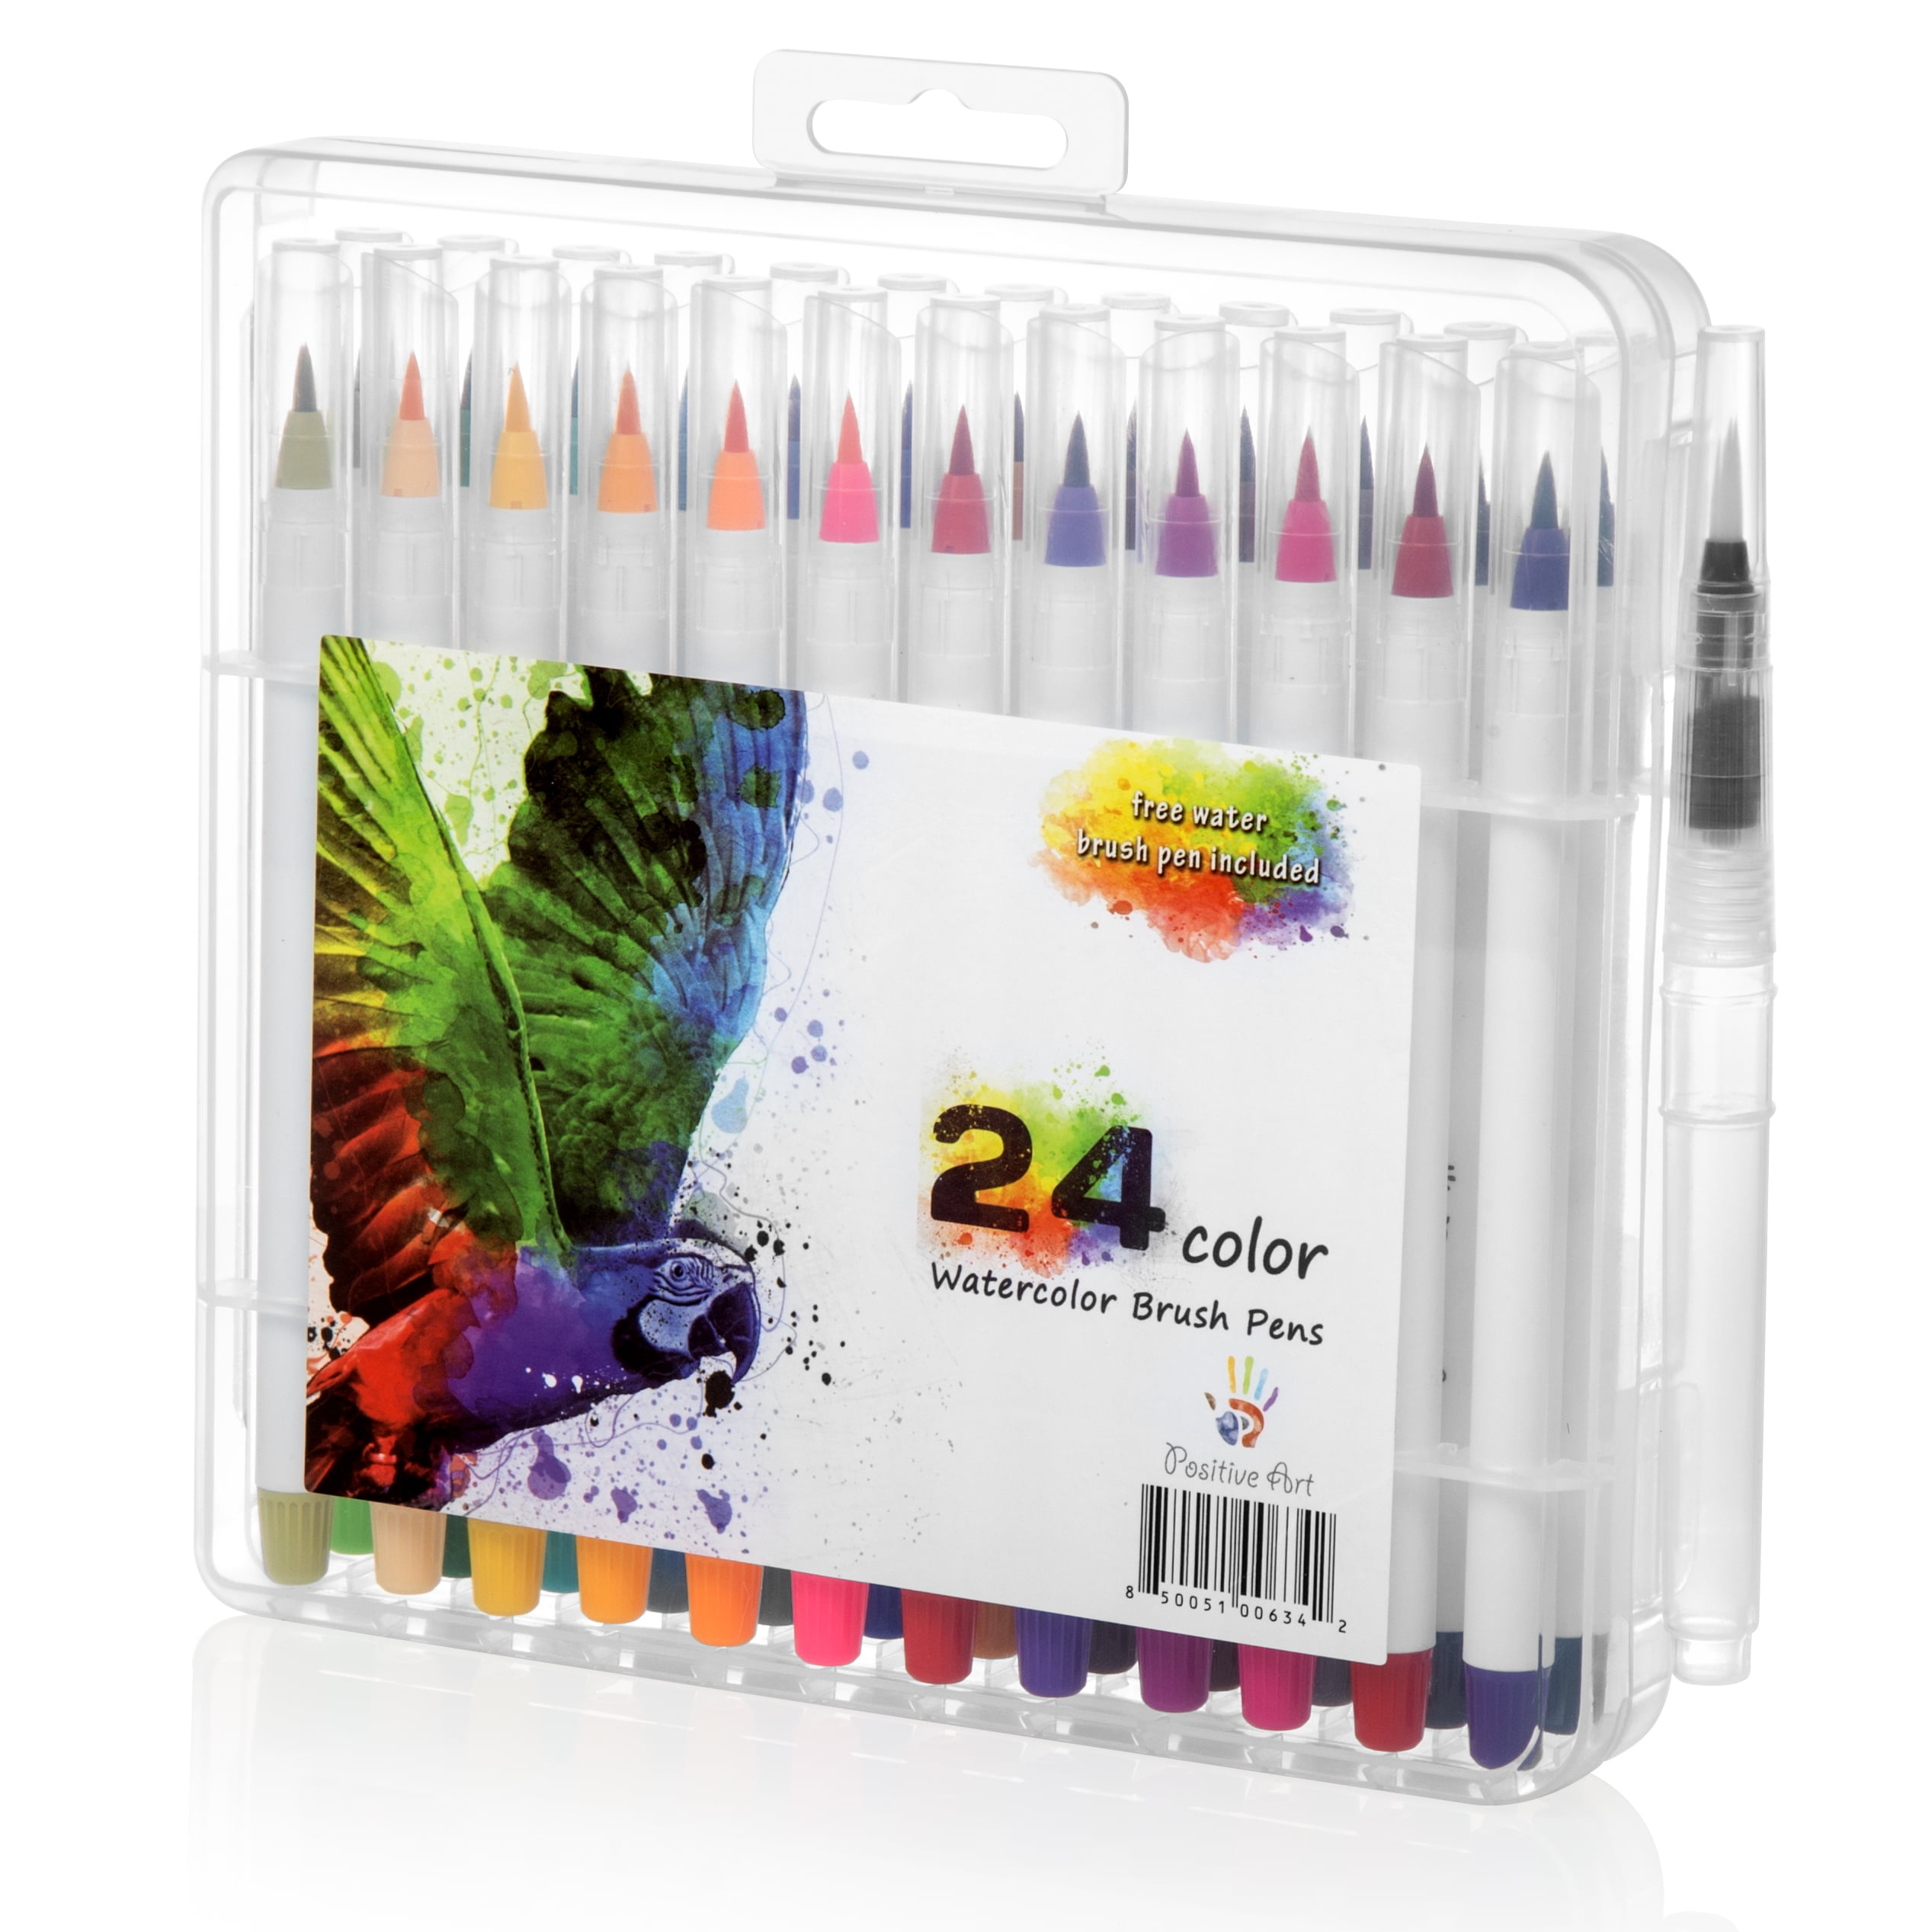 faillissement evenaar Handschrift watercolor brush pen 24 colors by positive art: 24 colors and 1 free water  coloring brush with flexible tip for precision, for adult crafts, manga,  comic, and calligraphy, odorless and non-toxic - Walmart.com